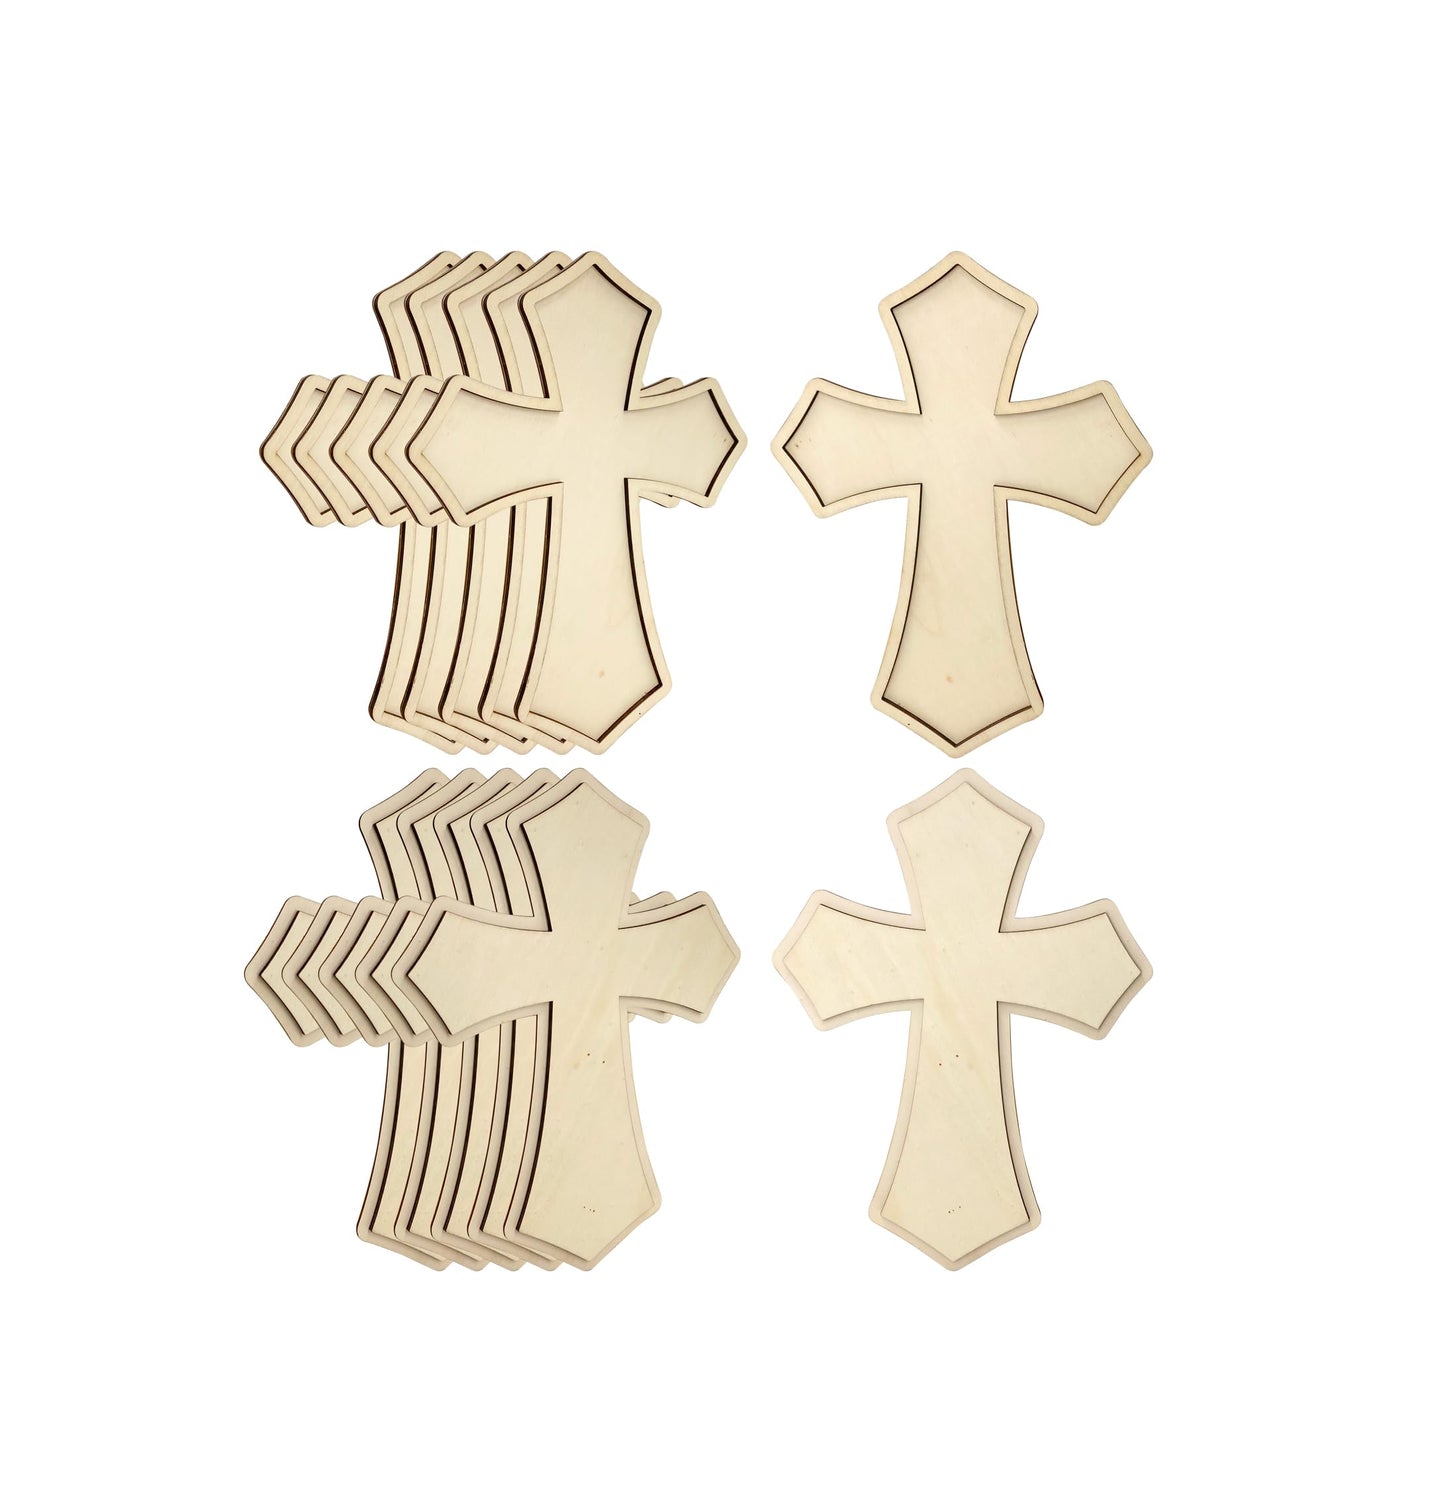 12 Inch 12 Pieces Wood Cross Antique Shaped Unfinished Wooden Cross Layered and Framed Cross for Hobby Crafts